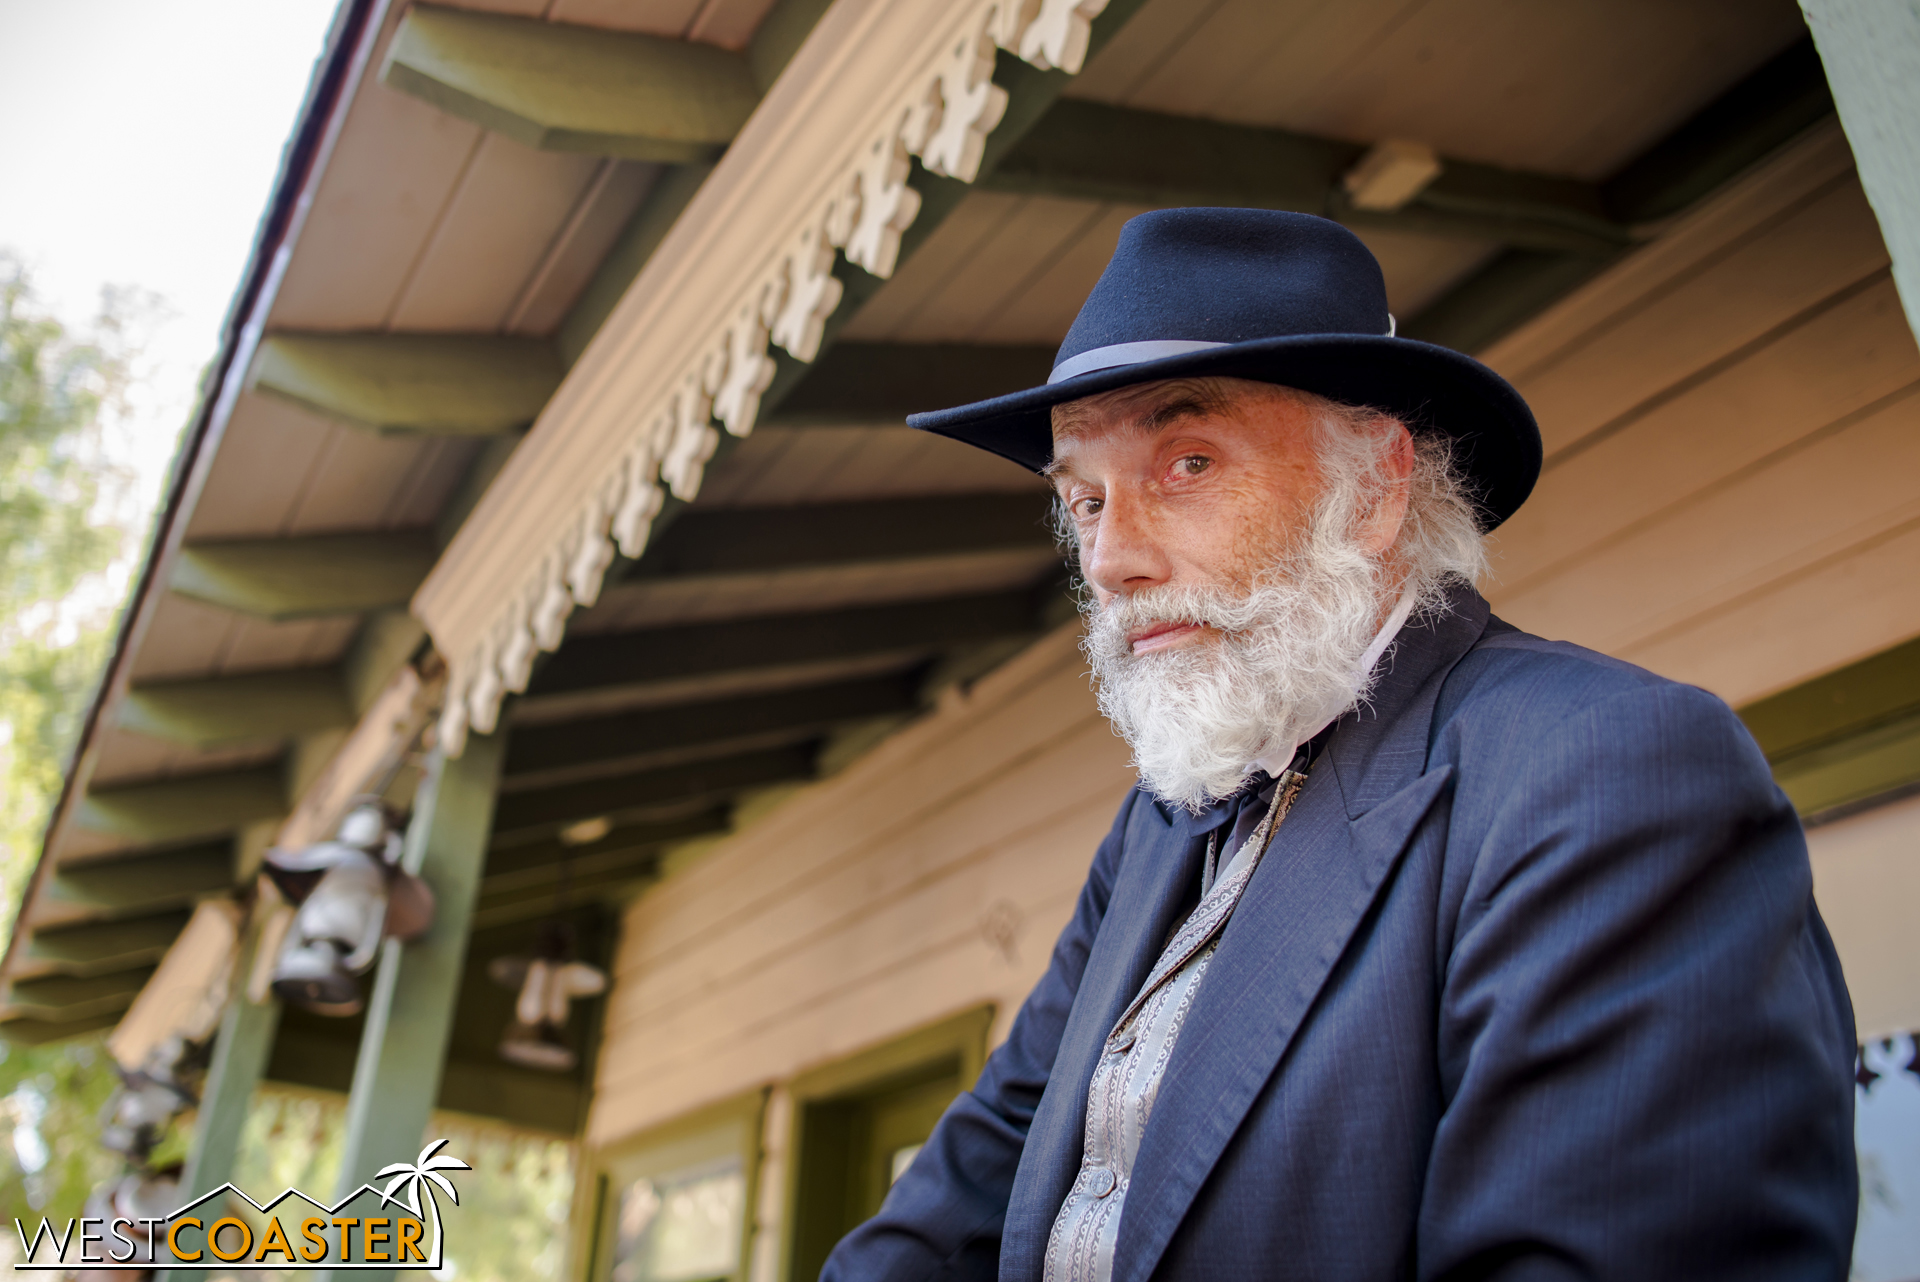  Or is he?&nbsp; Judge Roy Bean has seen a lot in his day, and though he is also skeptical, he cannot rule out the coincidences. 